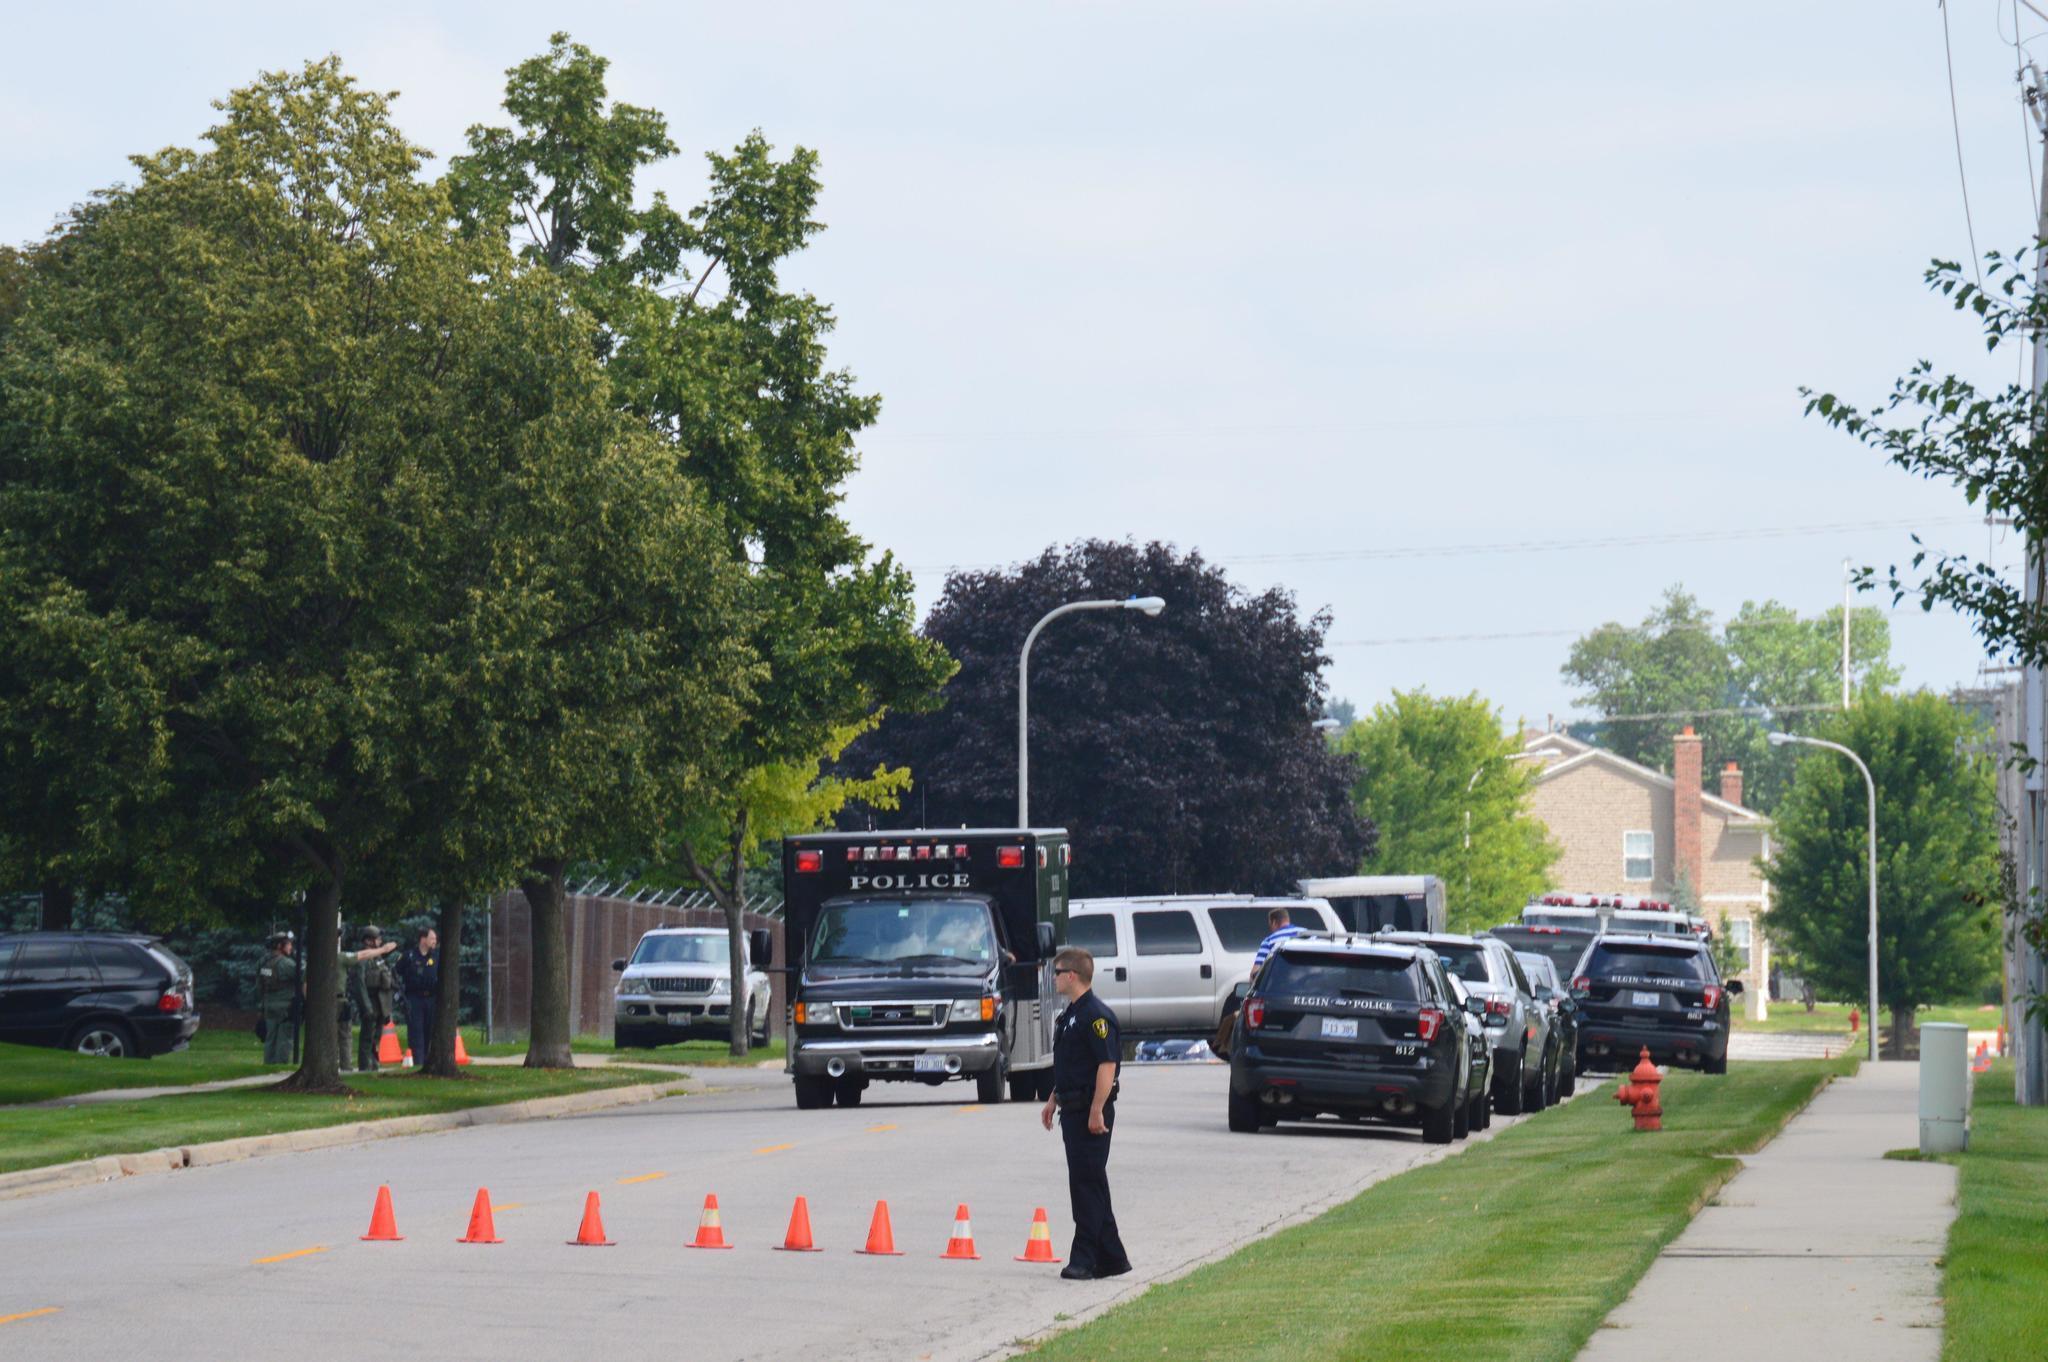 Suspect in custody after north Elgin incident that closed streets, required tactical vehicles